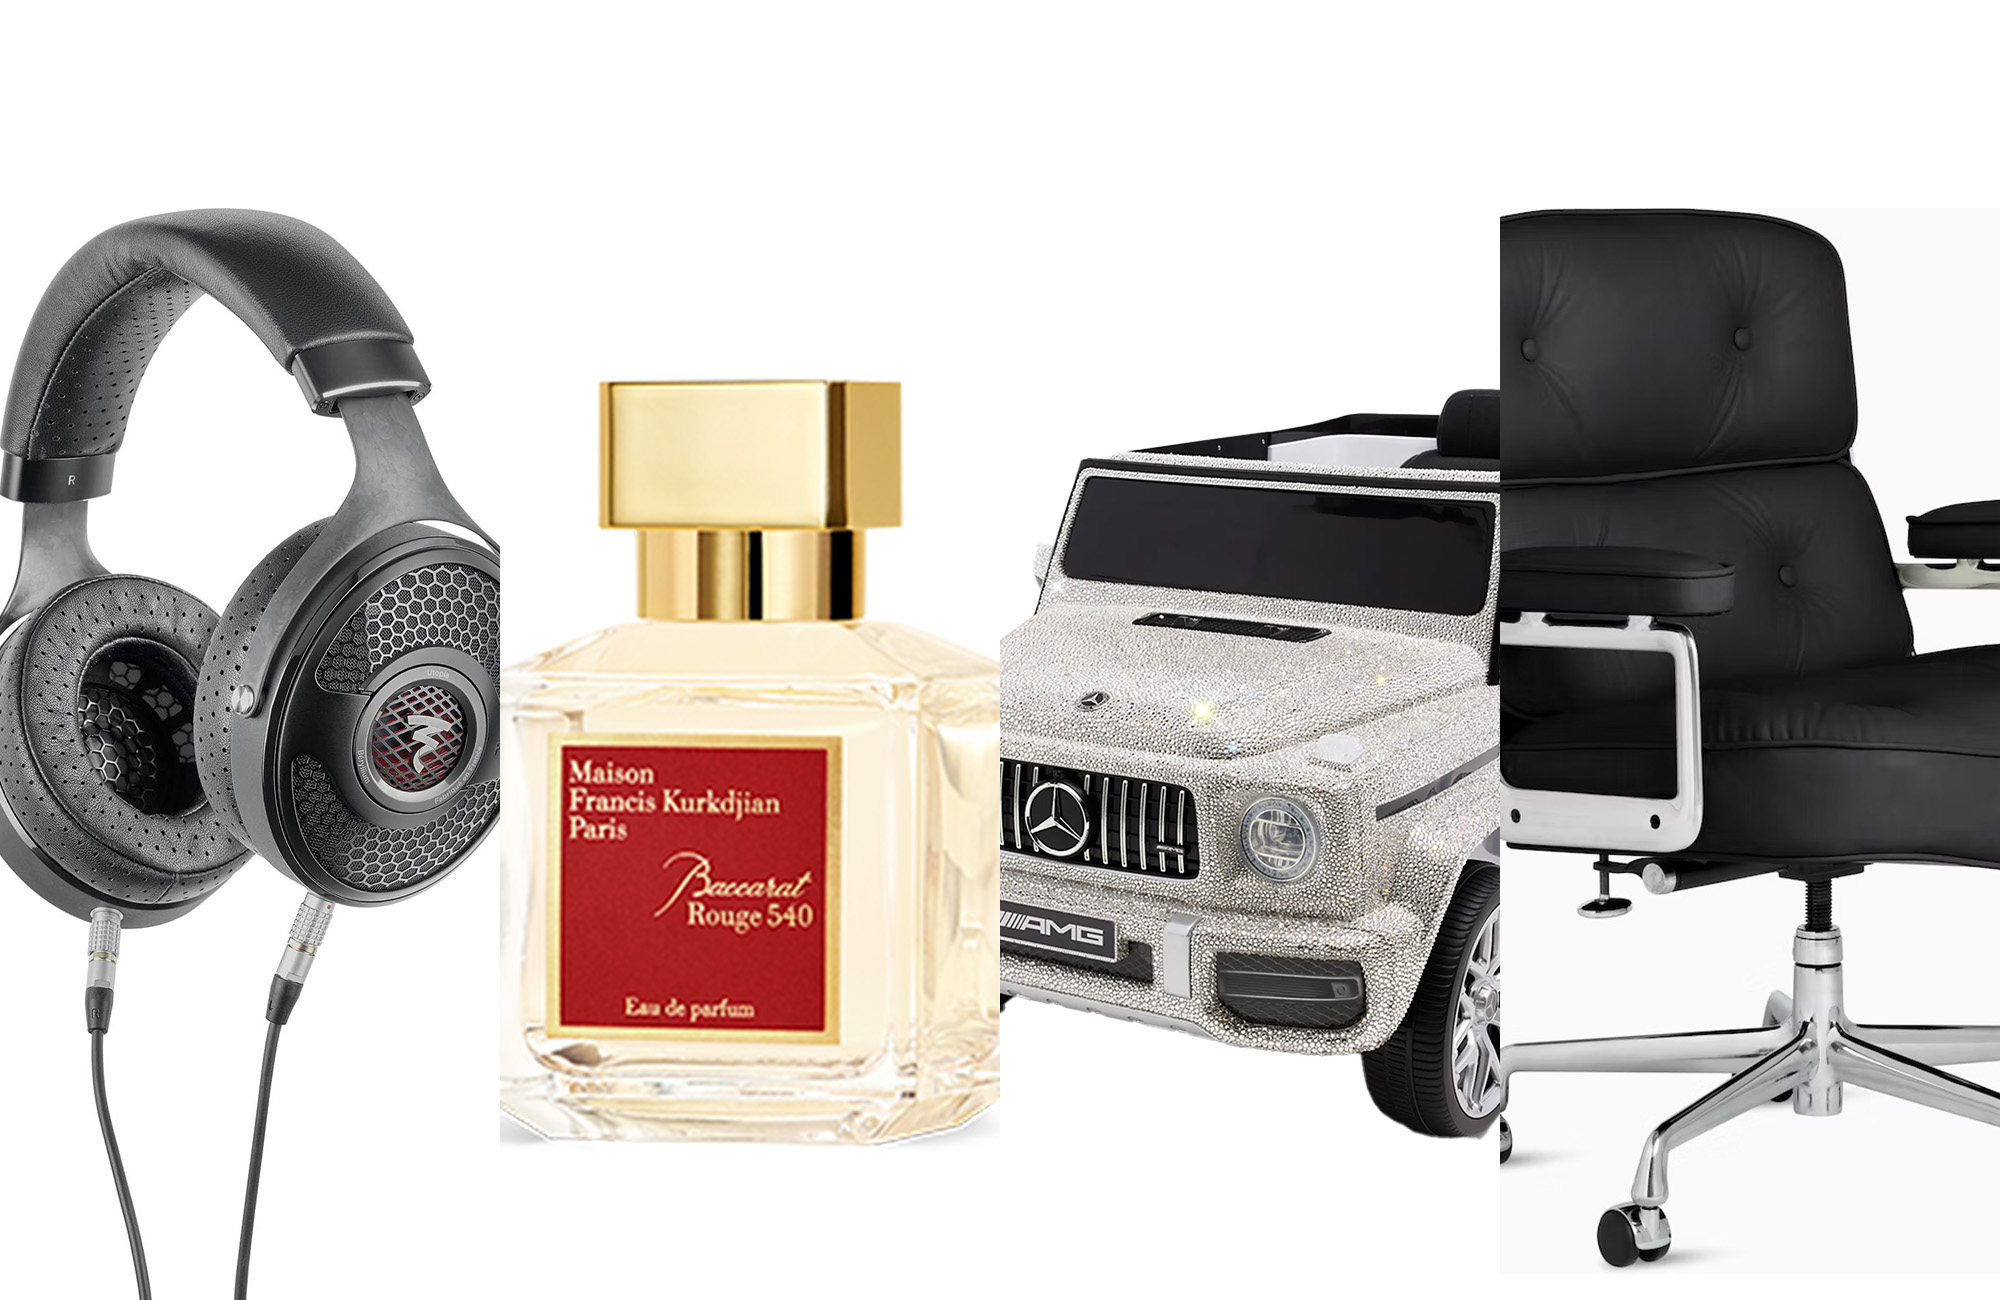 Gifts to help your friends and family indulge in luxury